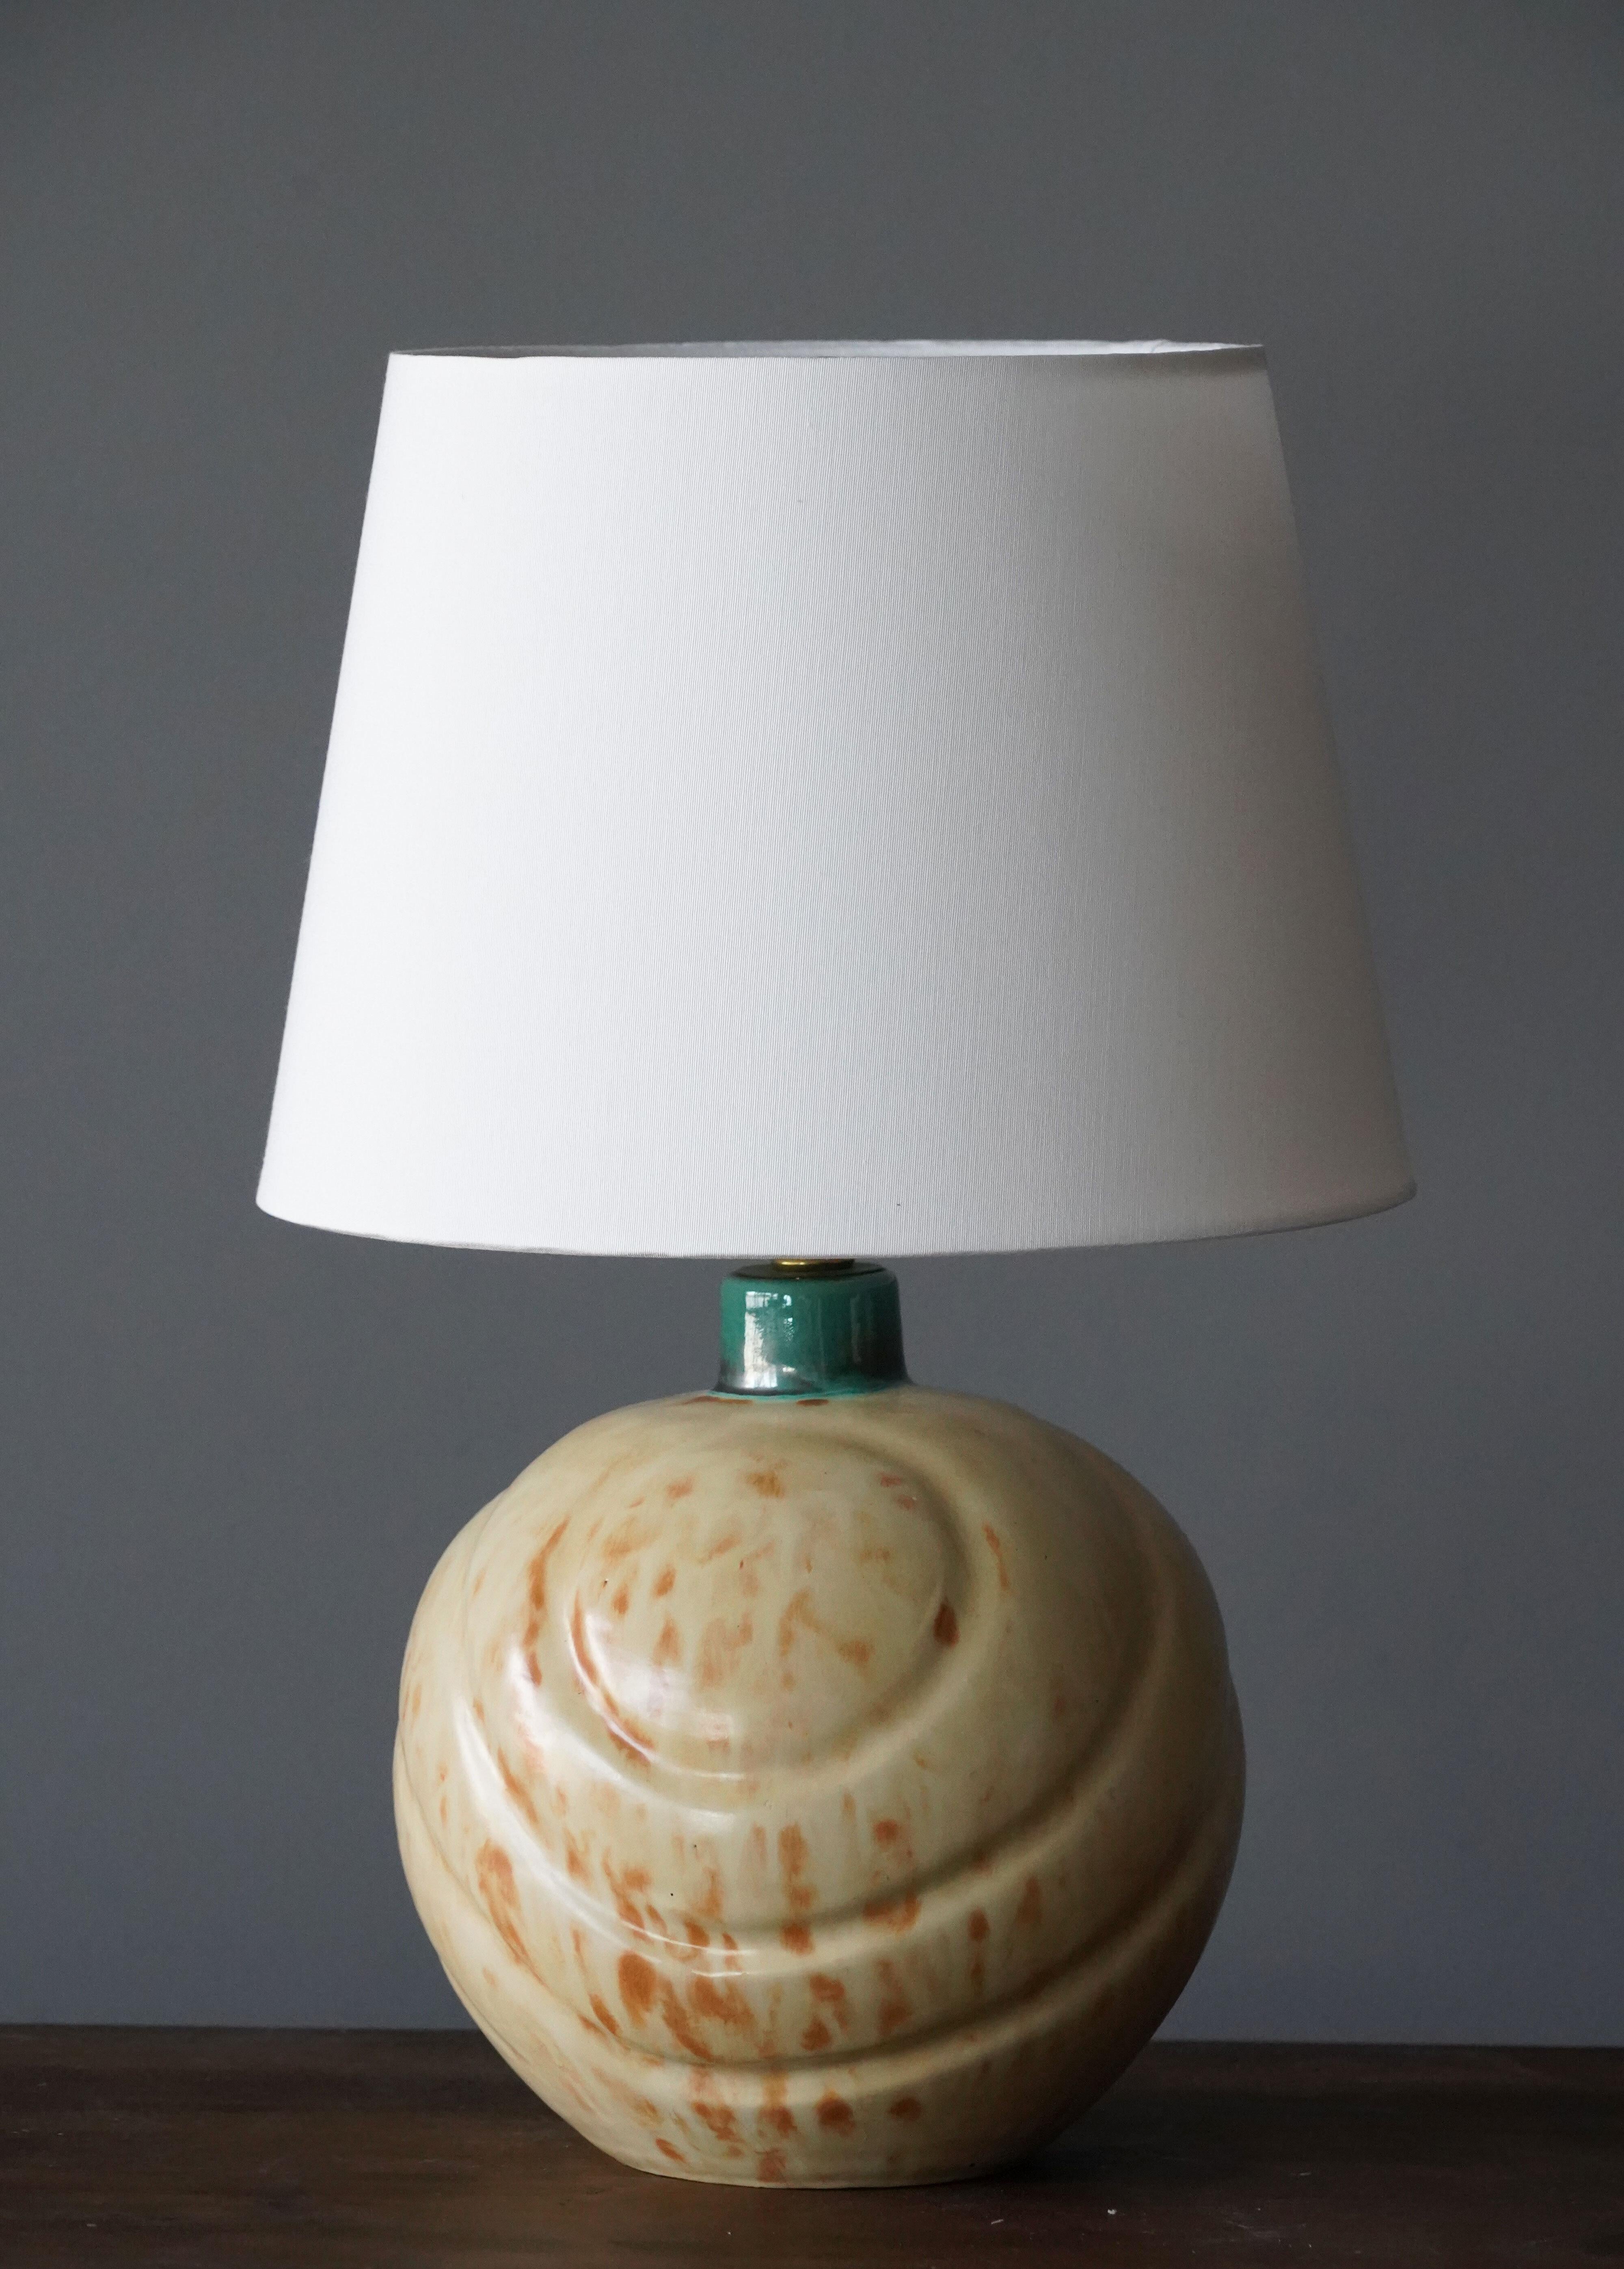 A sizable table lamp by iconic Swedish ceramic firm Ekeby. In glazed stoneware. Marked and dated.

Sold without lampshade, stated dimensions excluding lampshade.

Other designers of the period include Axel Salto, Carl Harry Stålhane, Berndt